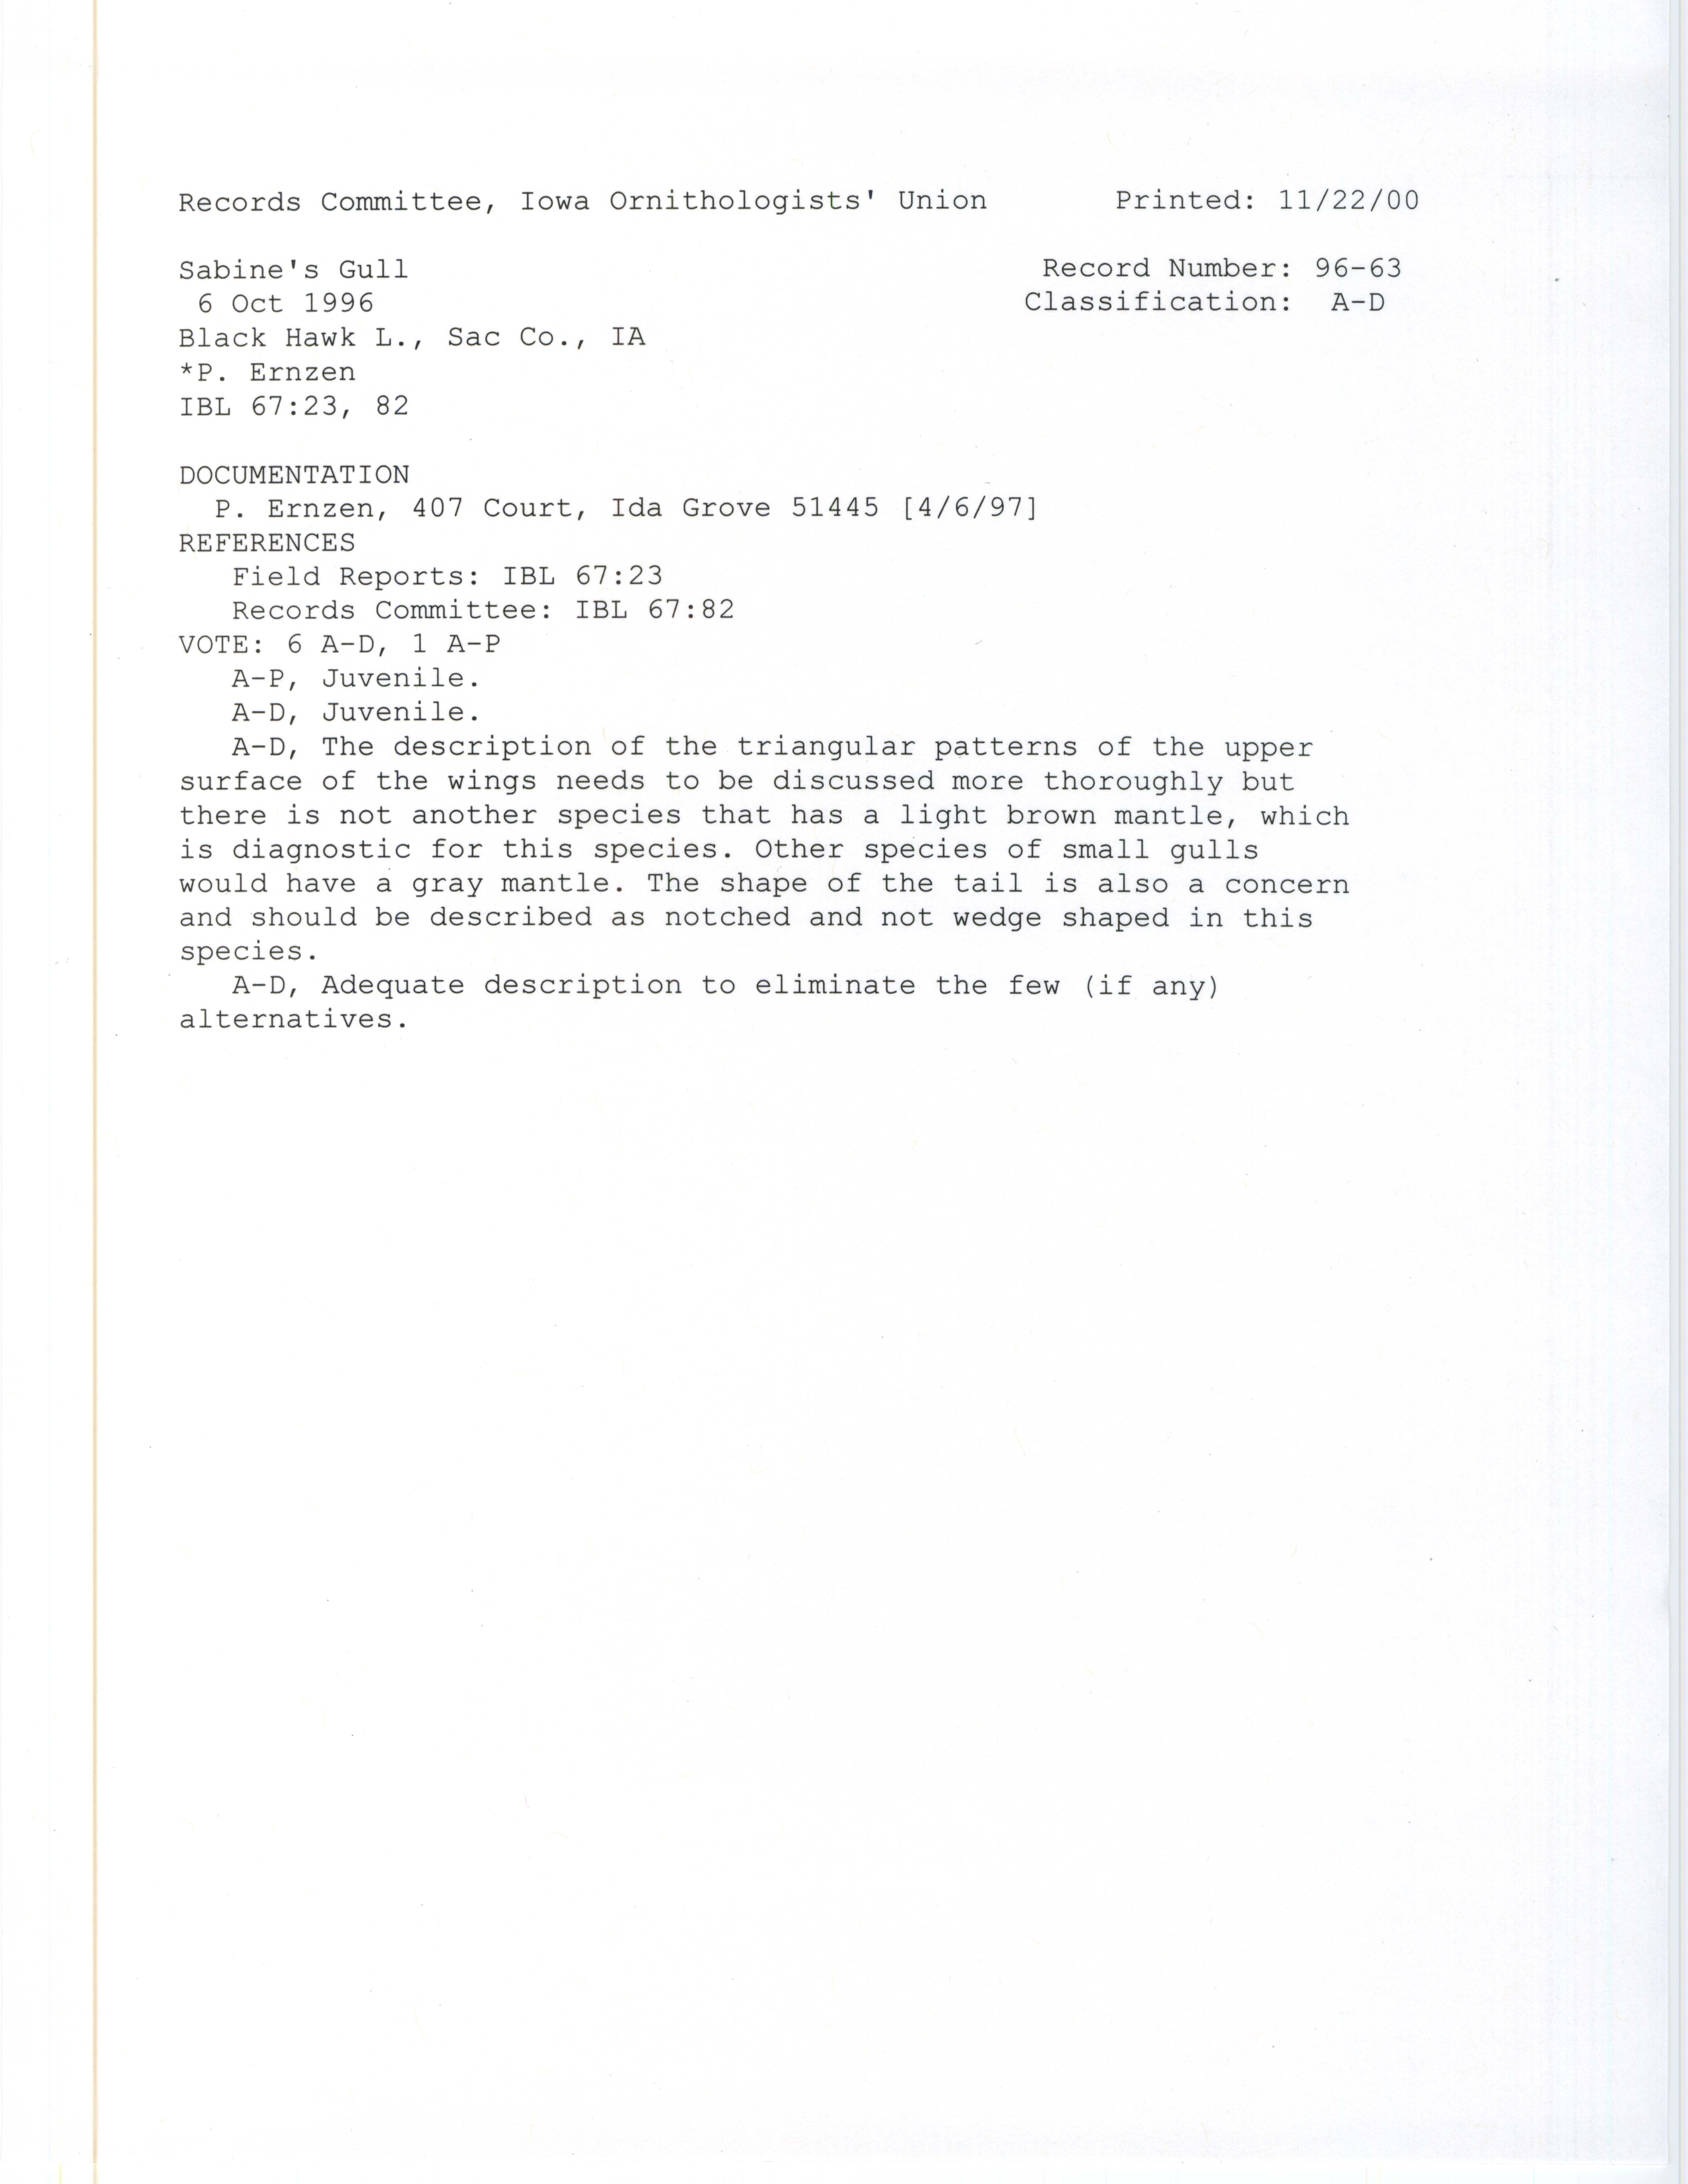 Records Committee review for rare bird sighting of Sabine's Gull at Black Hawk Lake, 1996